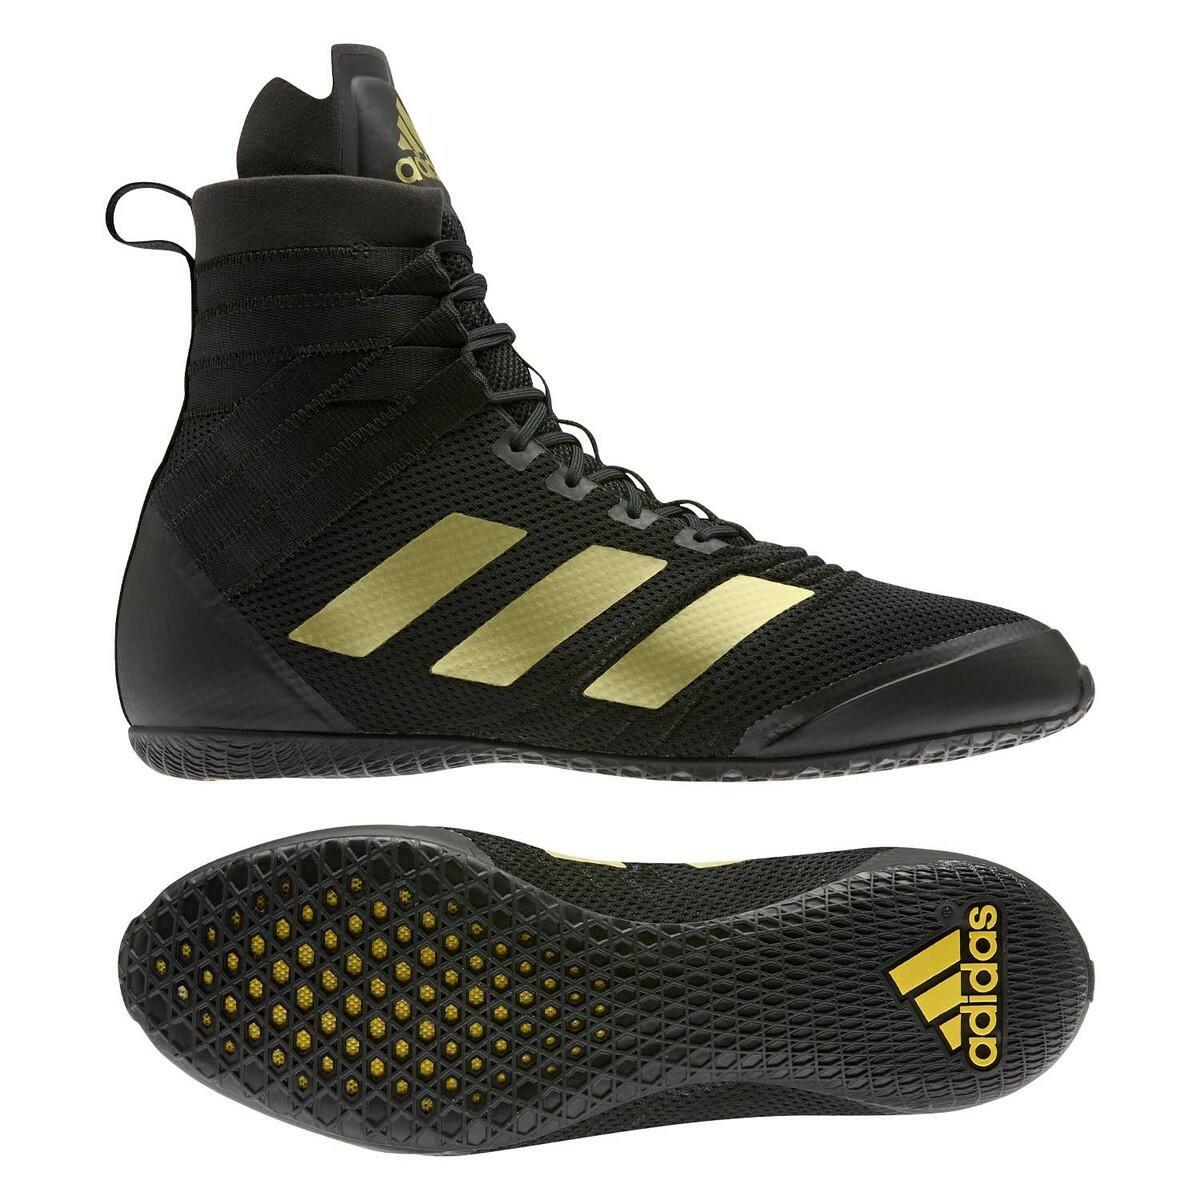 Black-Gold Adidas Speedex 18 Boxing Boots from Made4Fighters